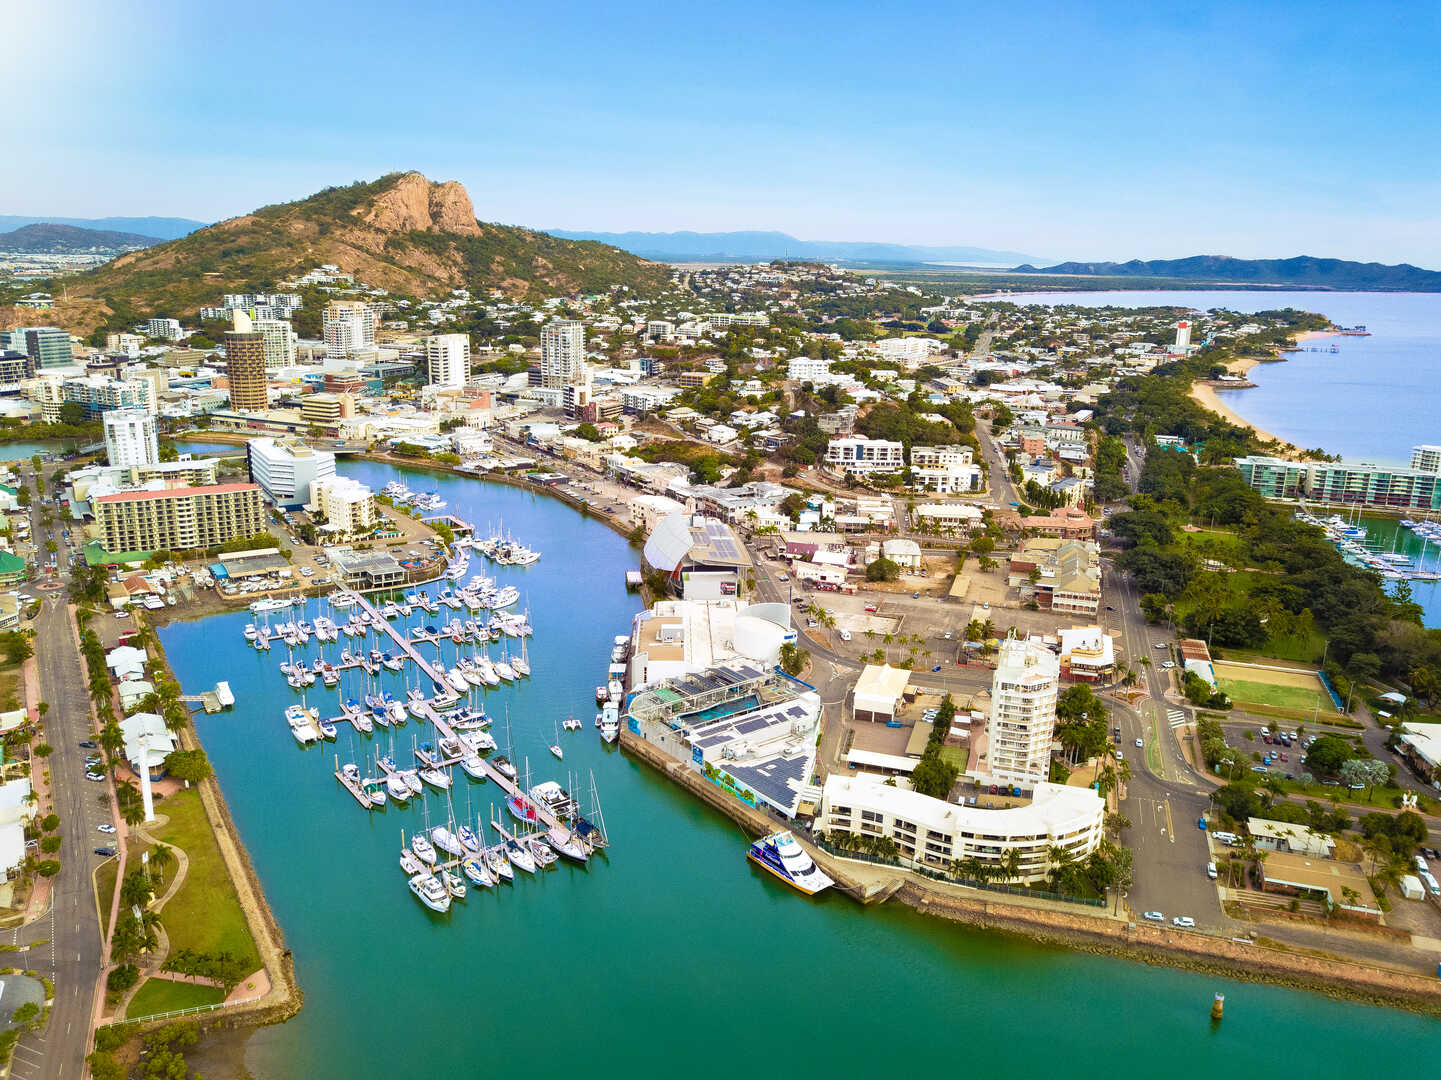 MQ - Townsville and North Queensland